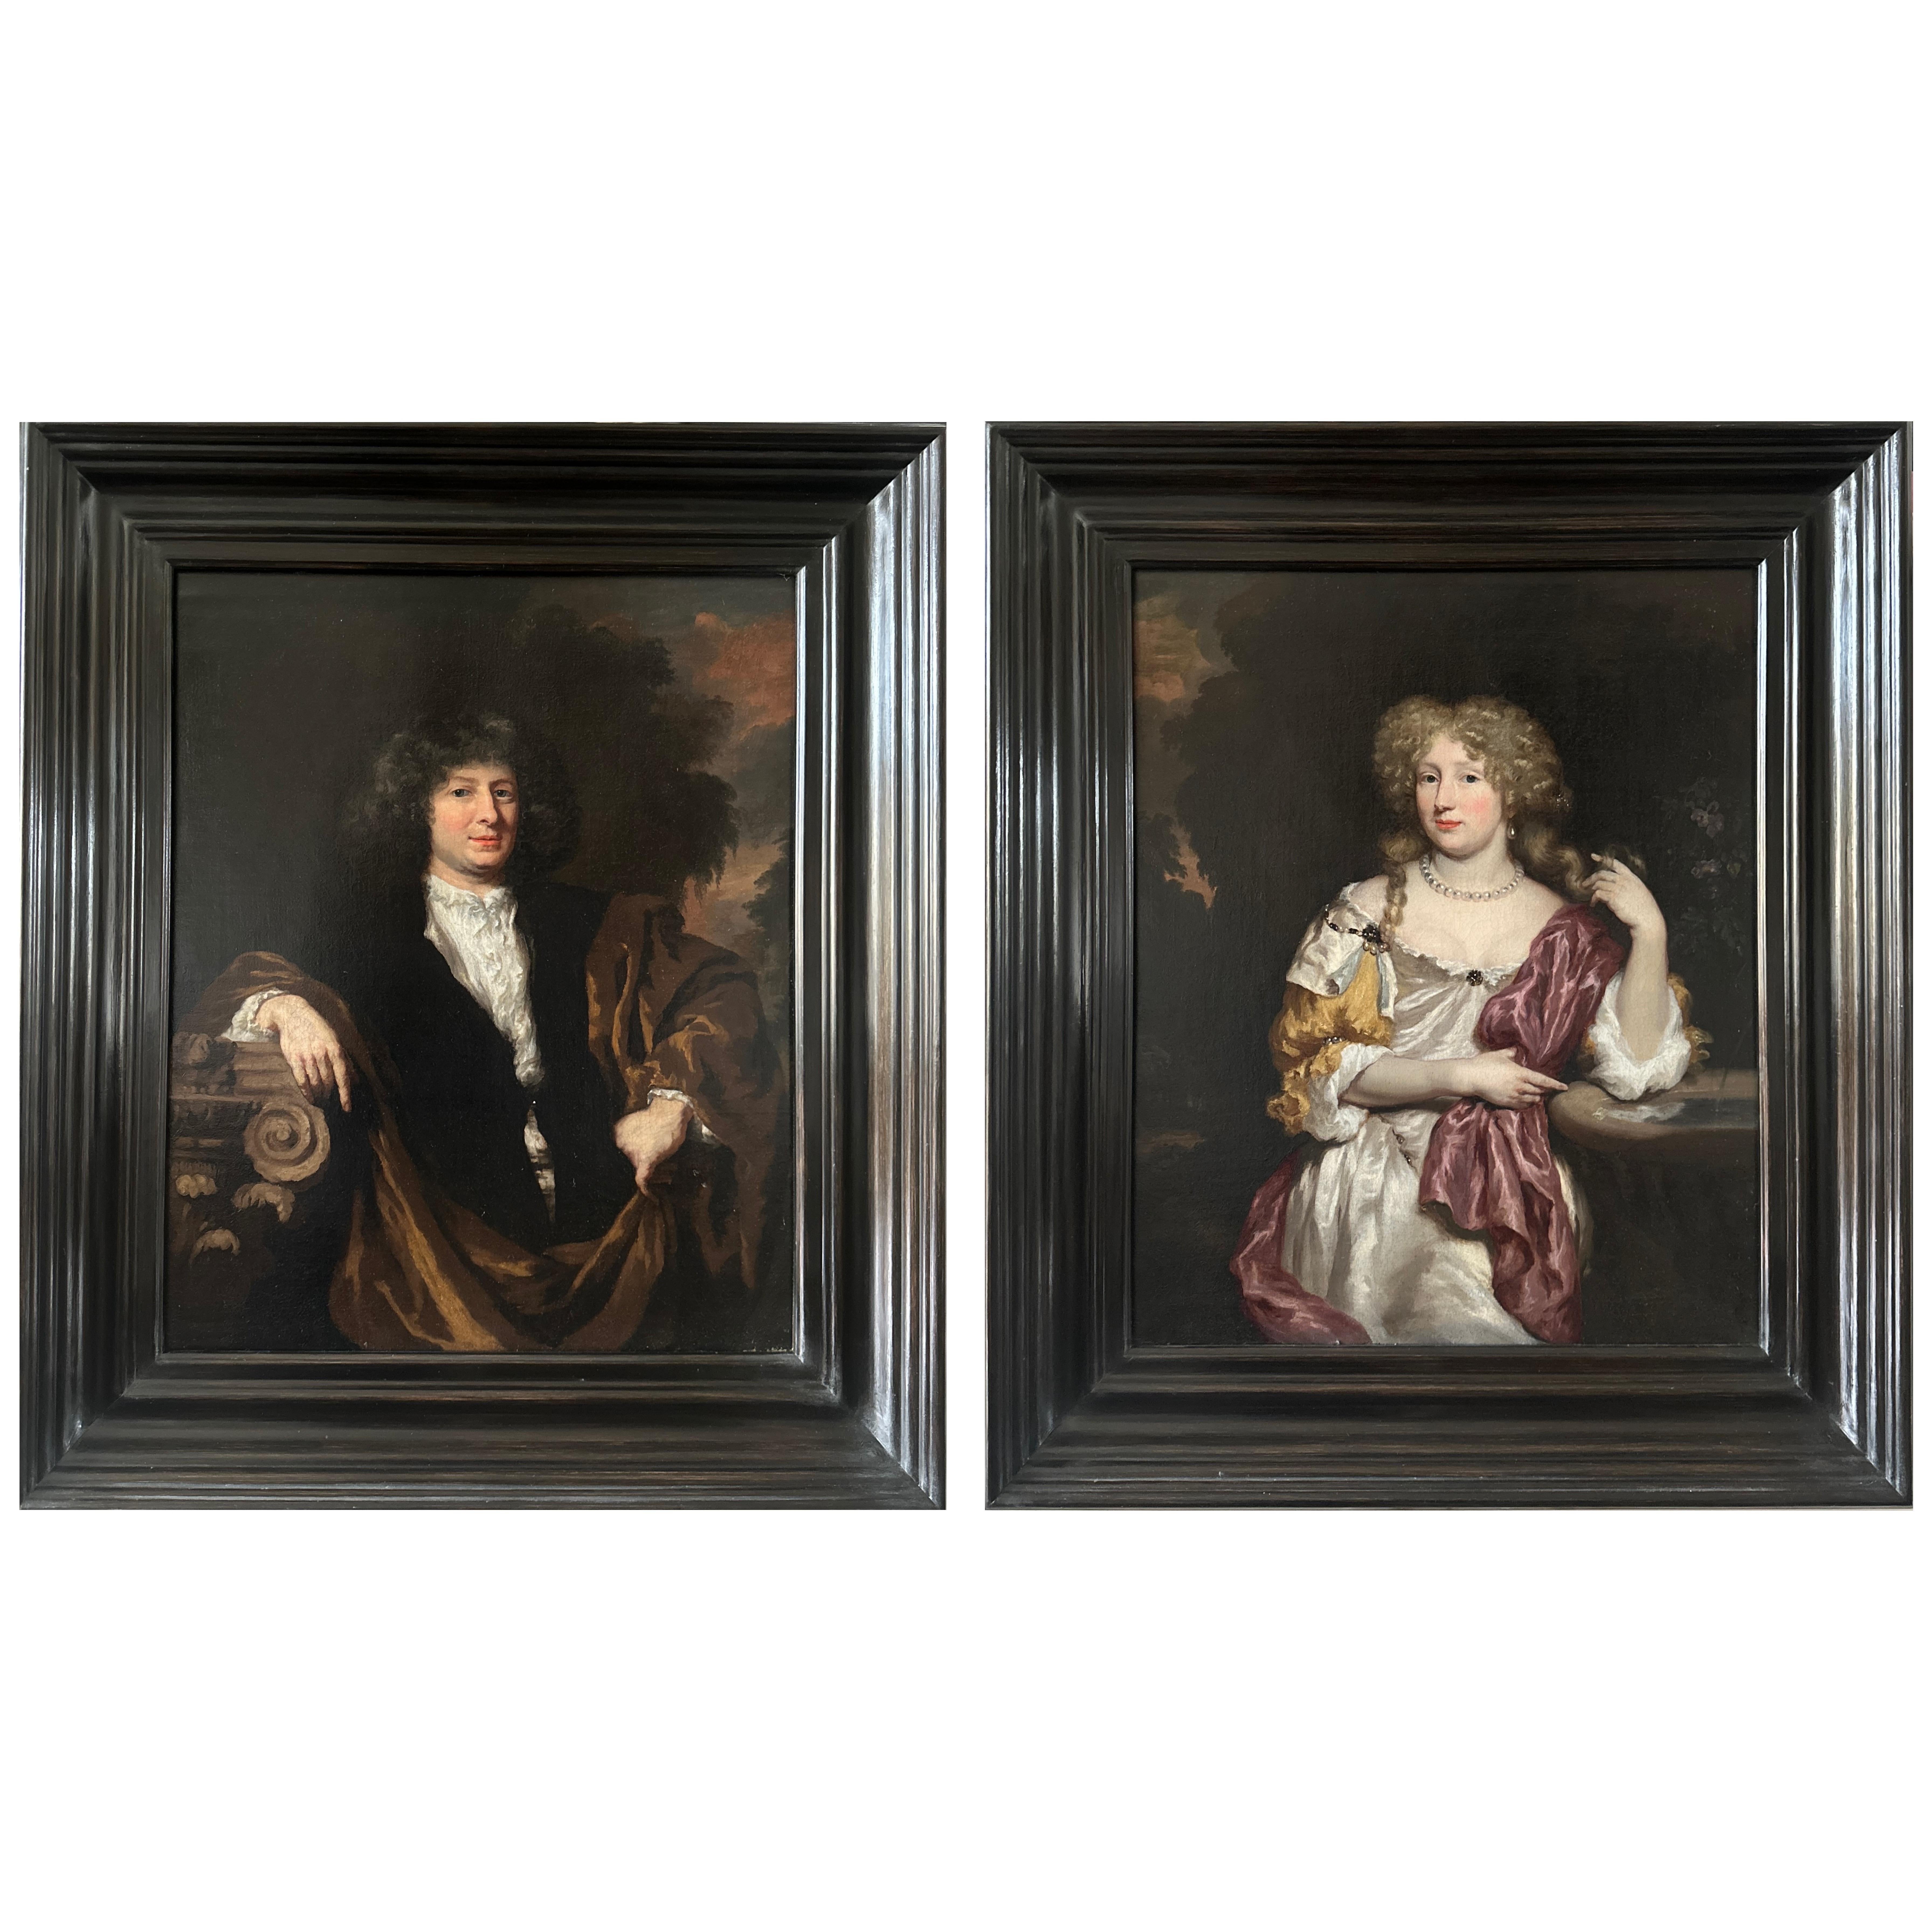 Nicolaes Maes Portrait Painting - A pair of Dutch 17th century old master portraits of a husband and wife